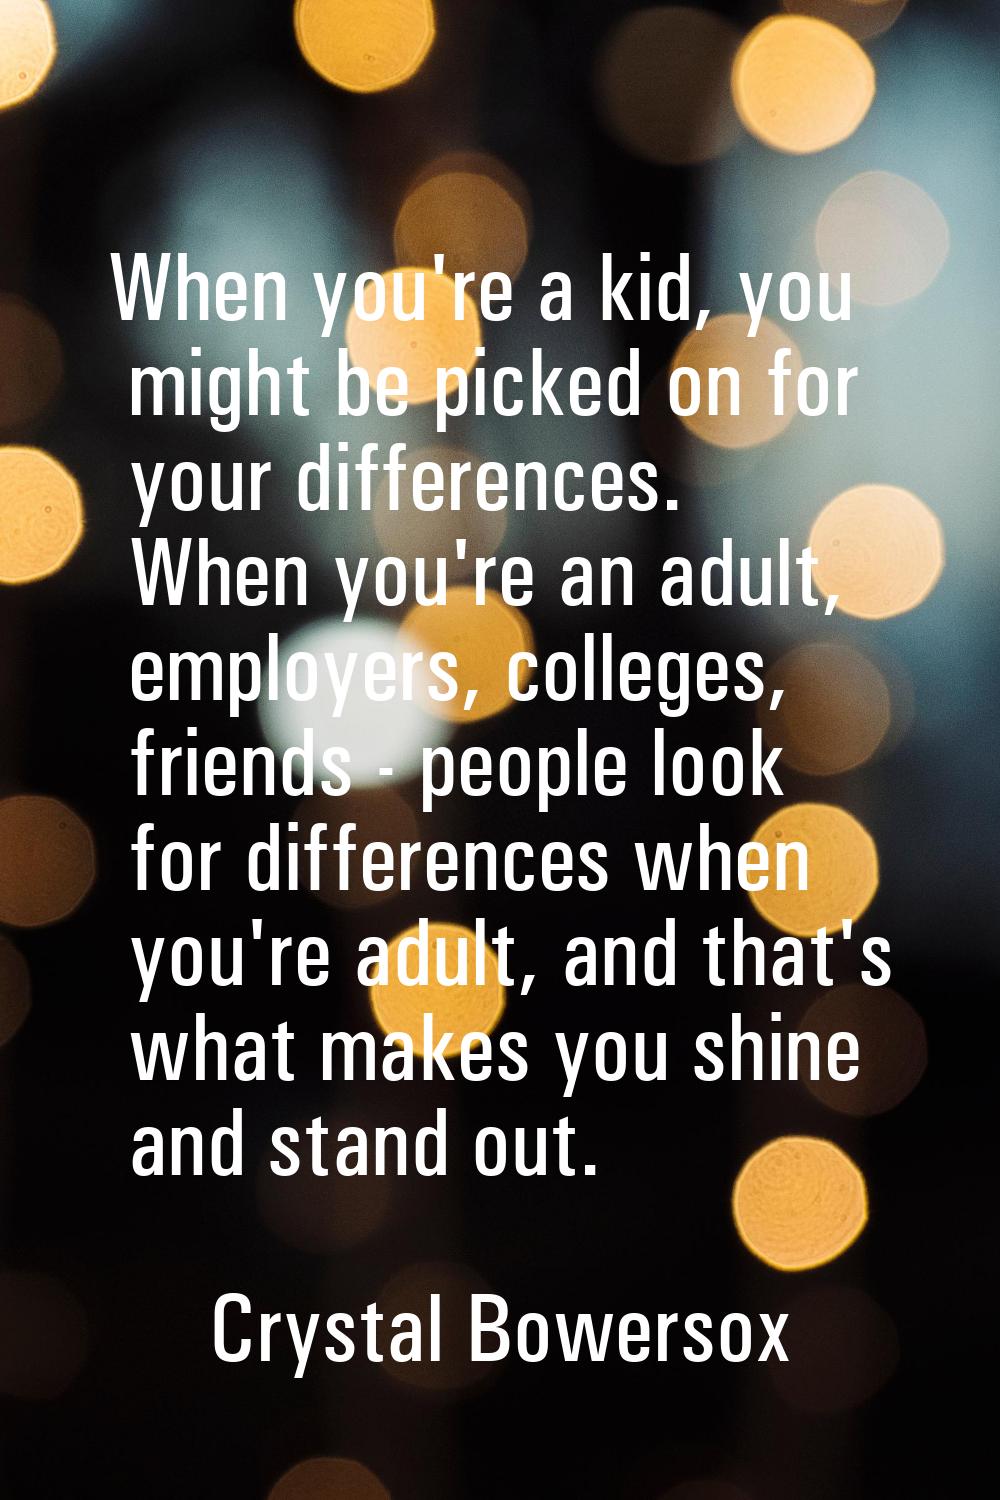 When you're a kid, you might be picked on for your differences. When you're an adult, employers, co